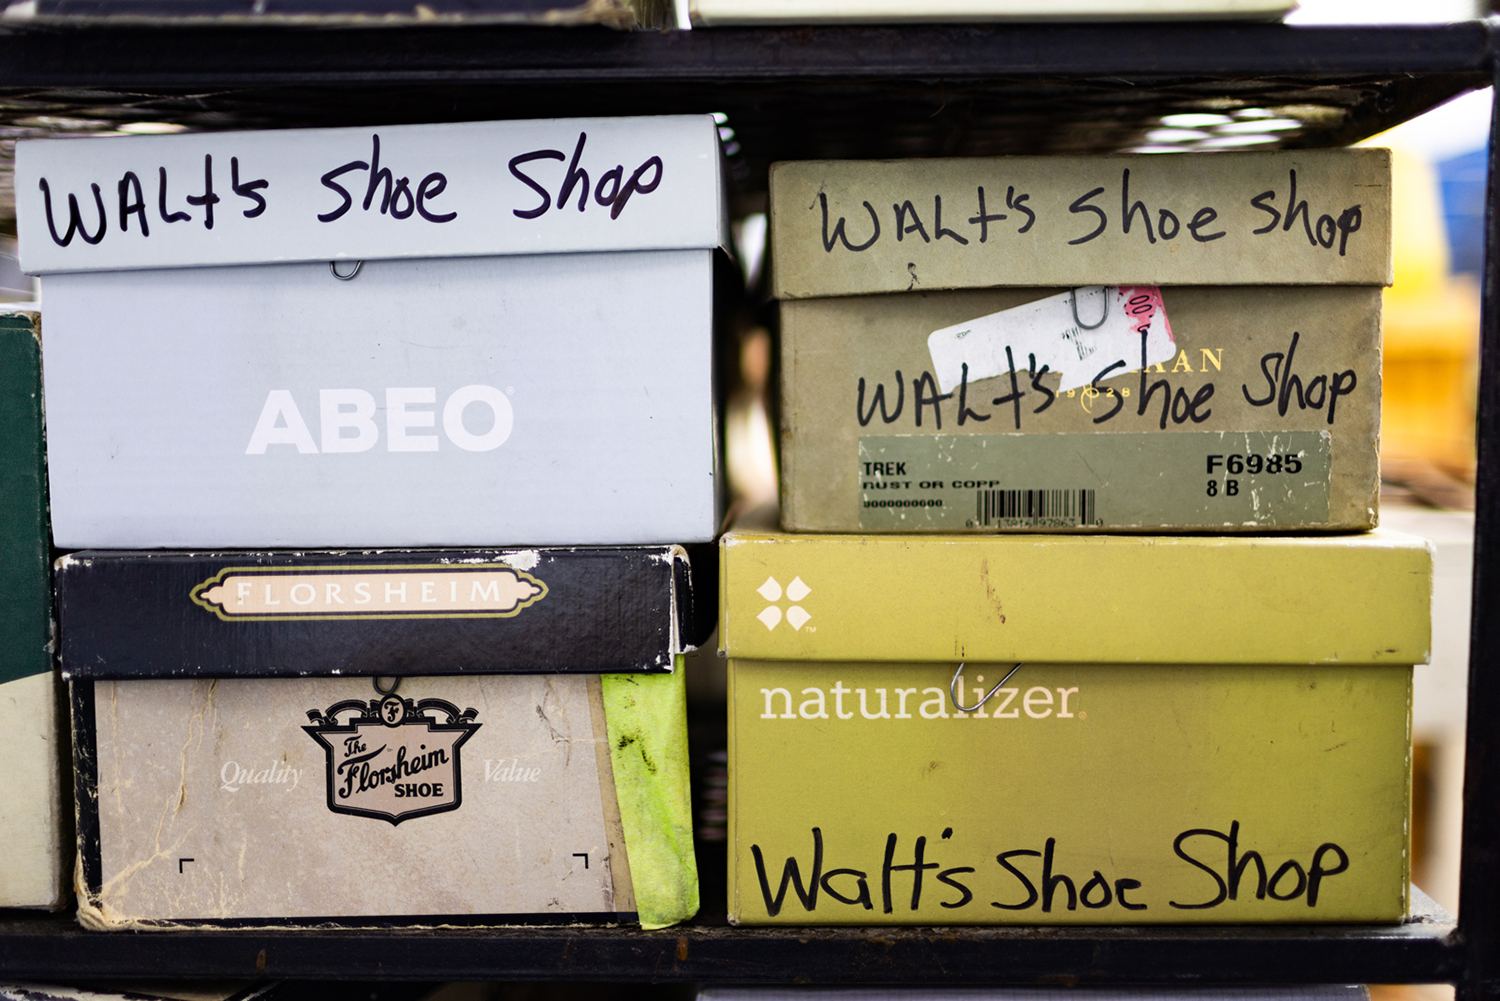 Shoe boxes labeled “Walt’s Shoe Shop” rest on shelves in the work area of the shoe repair shop.